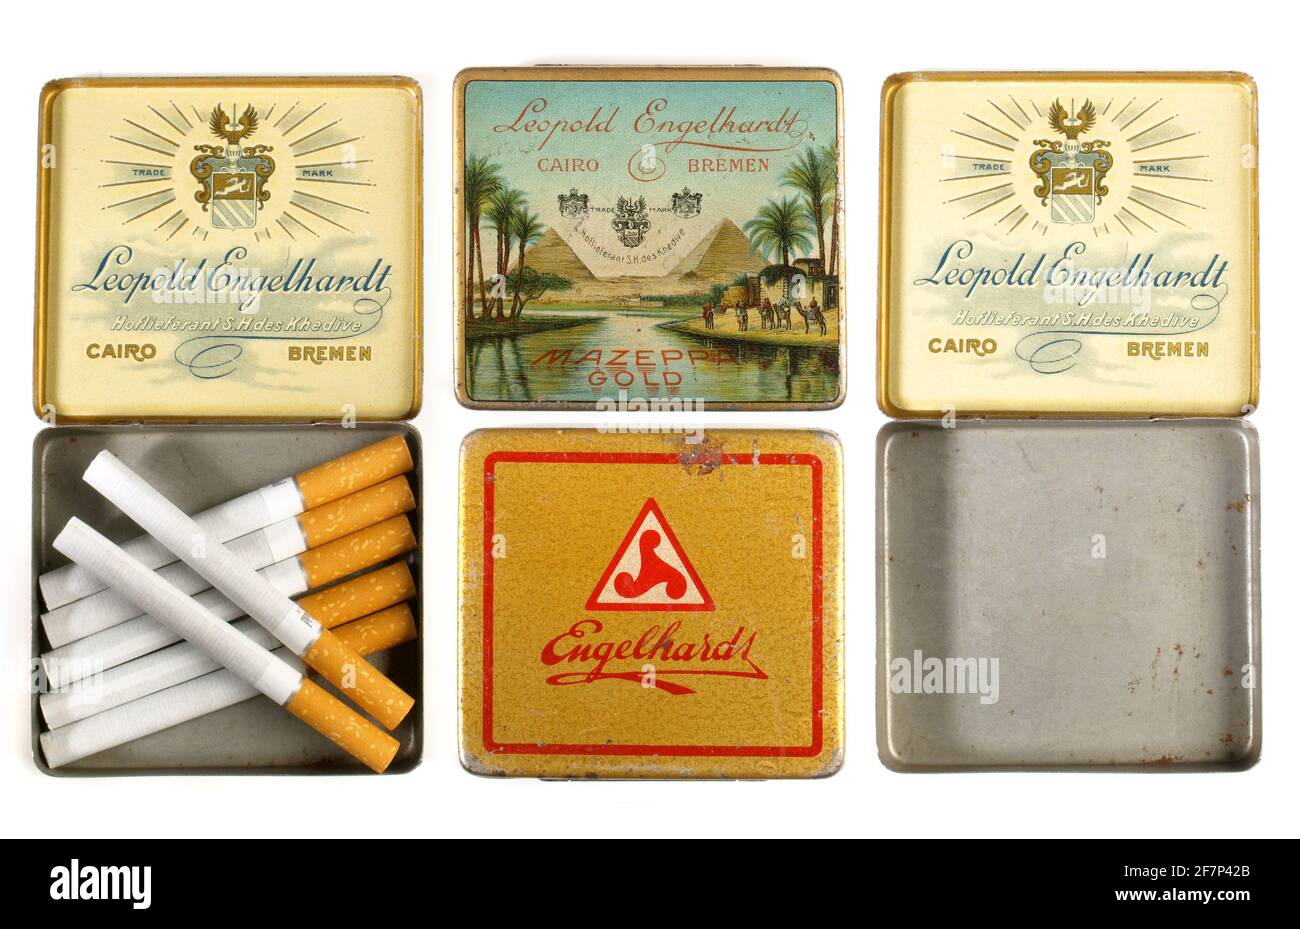 Vintage Cigarette Case with Cigarettes isolated on white Background Stock Photo